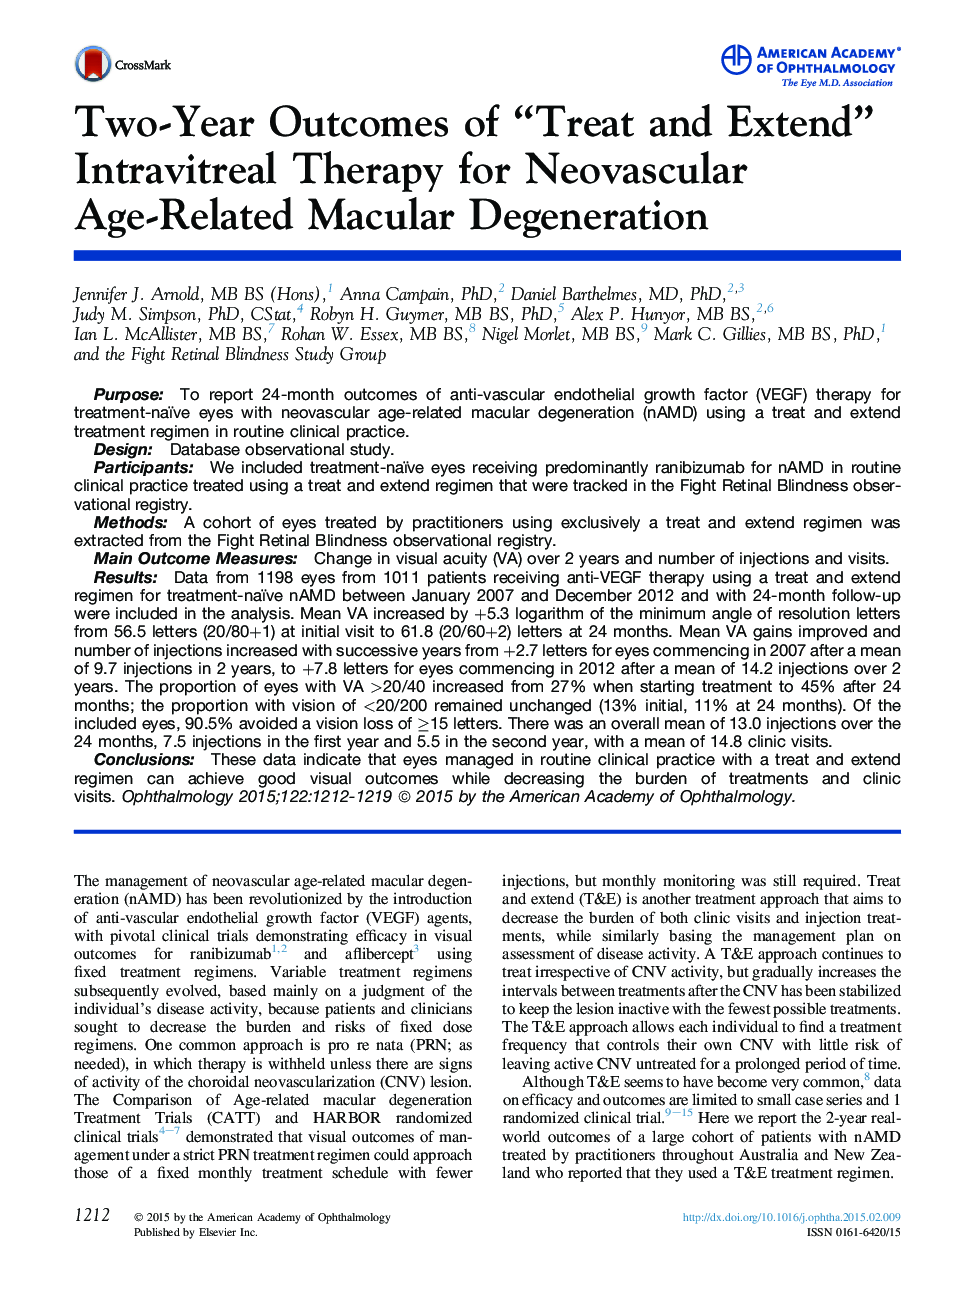 Two-Year Outcomes of “Treat and Extend” Intravitreal Therapy for Neovascular Age-Related Macular Degeneration